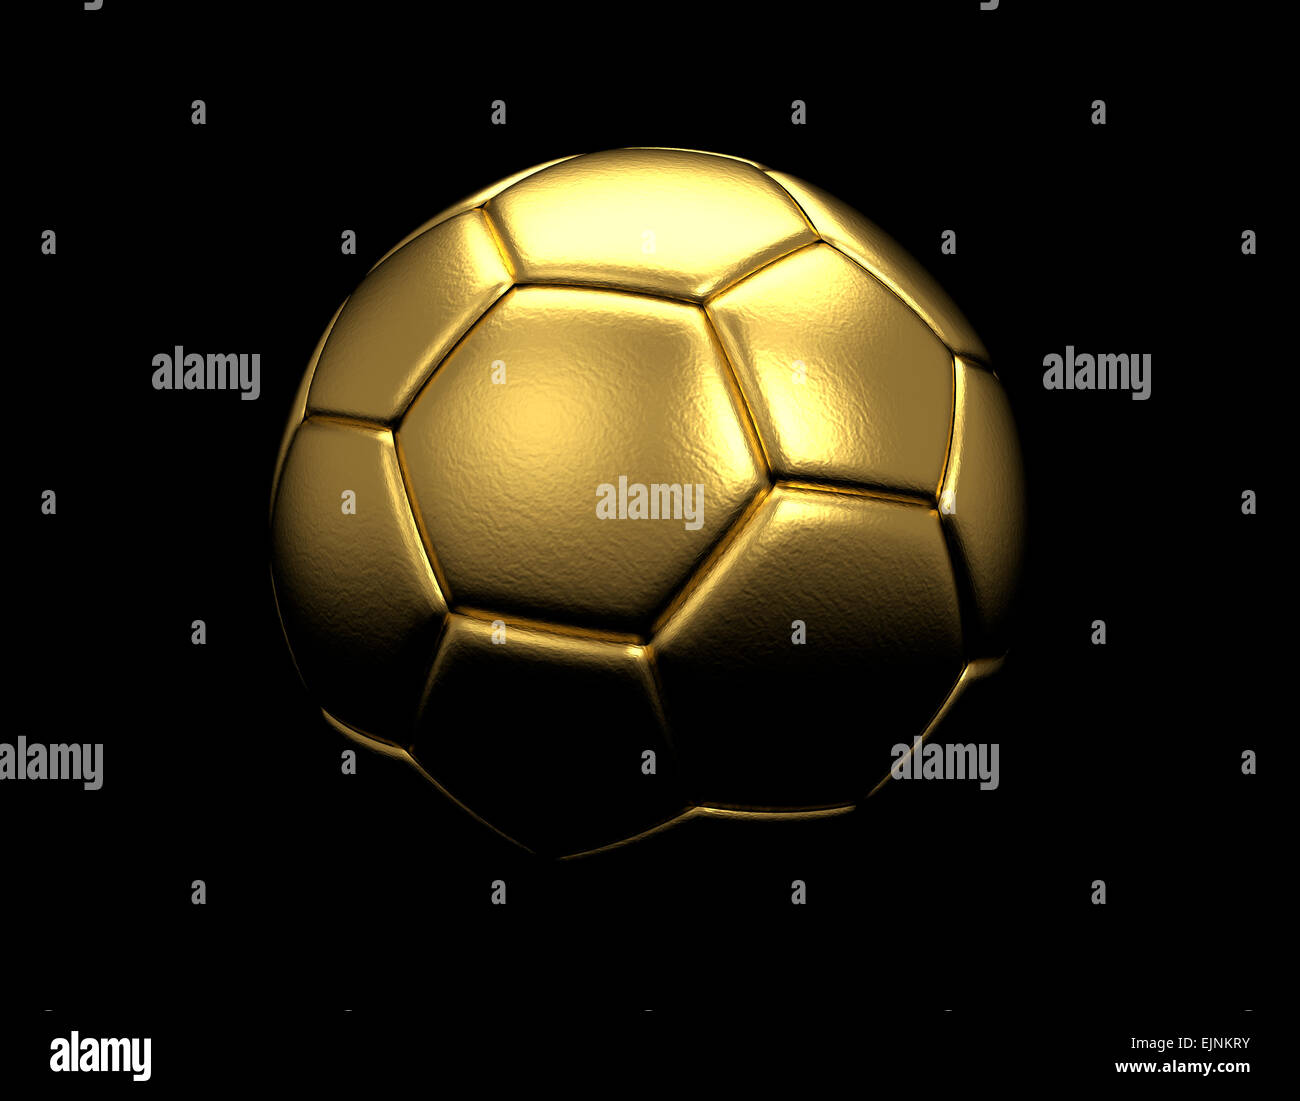 Gold soccer ball isolated on black background Stock Photo